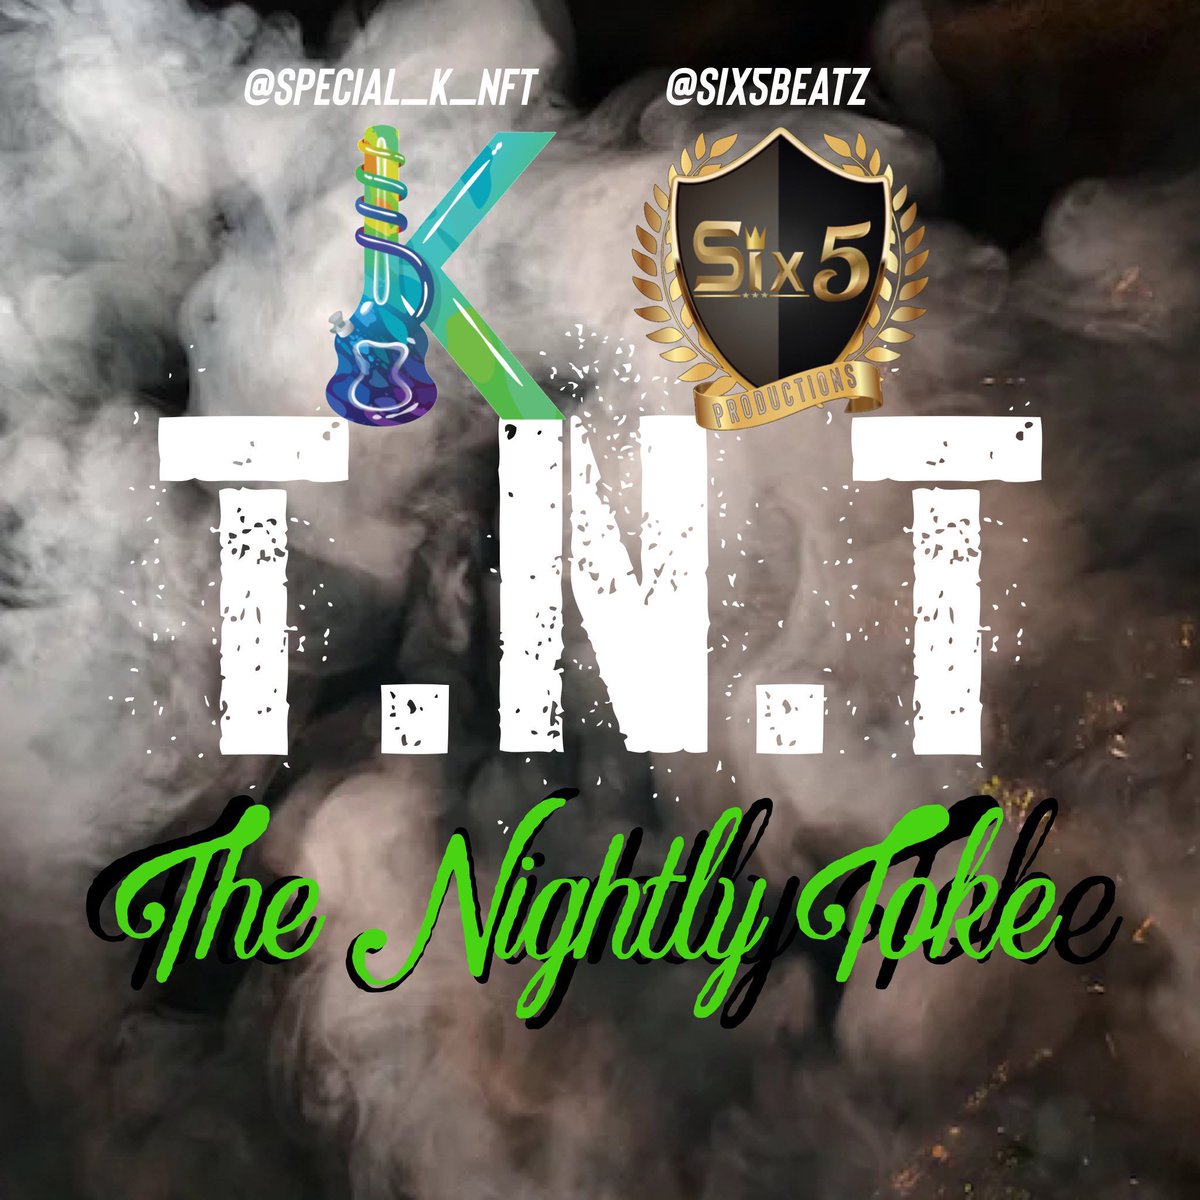 The Nightly Toke
#RETWEET & BE IN 2 #WIN!

Let’s vibe & toke w/ @chinpokies 
How to WIN:

♦️JOIN US! 
👣 FOLLOW— @special_k_nft  @Six5Beatz @gooftroop2025 @RareLazyApepes 

✅ RETWEET & tag your #BestBud🍀
#AMAs #NFTs #Eth 
Be in the Party

twitter.com/i/spaces/1nAKE…